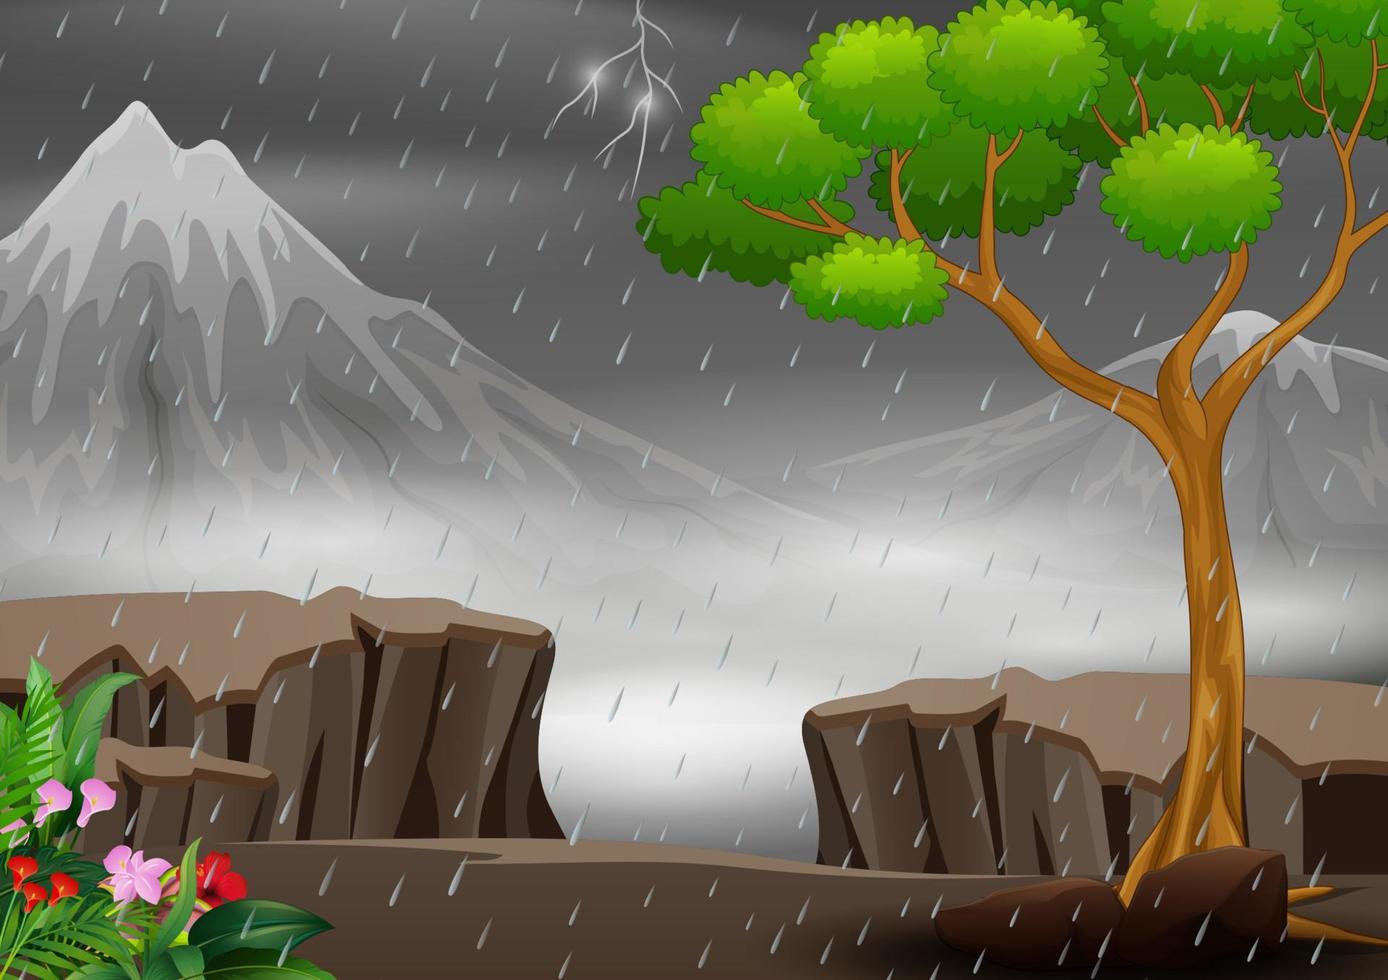 A thunderstorm in the nature landscape background vector